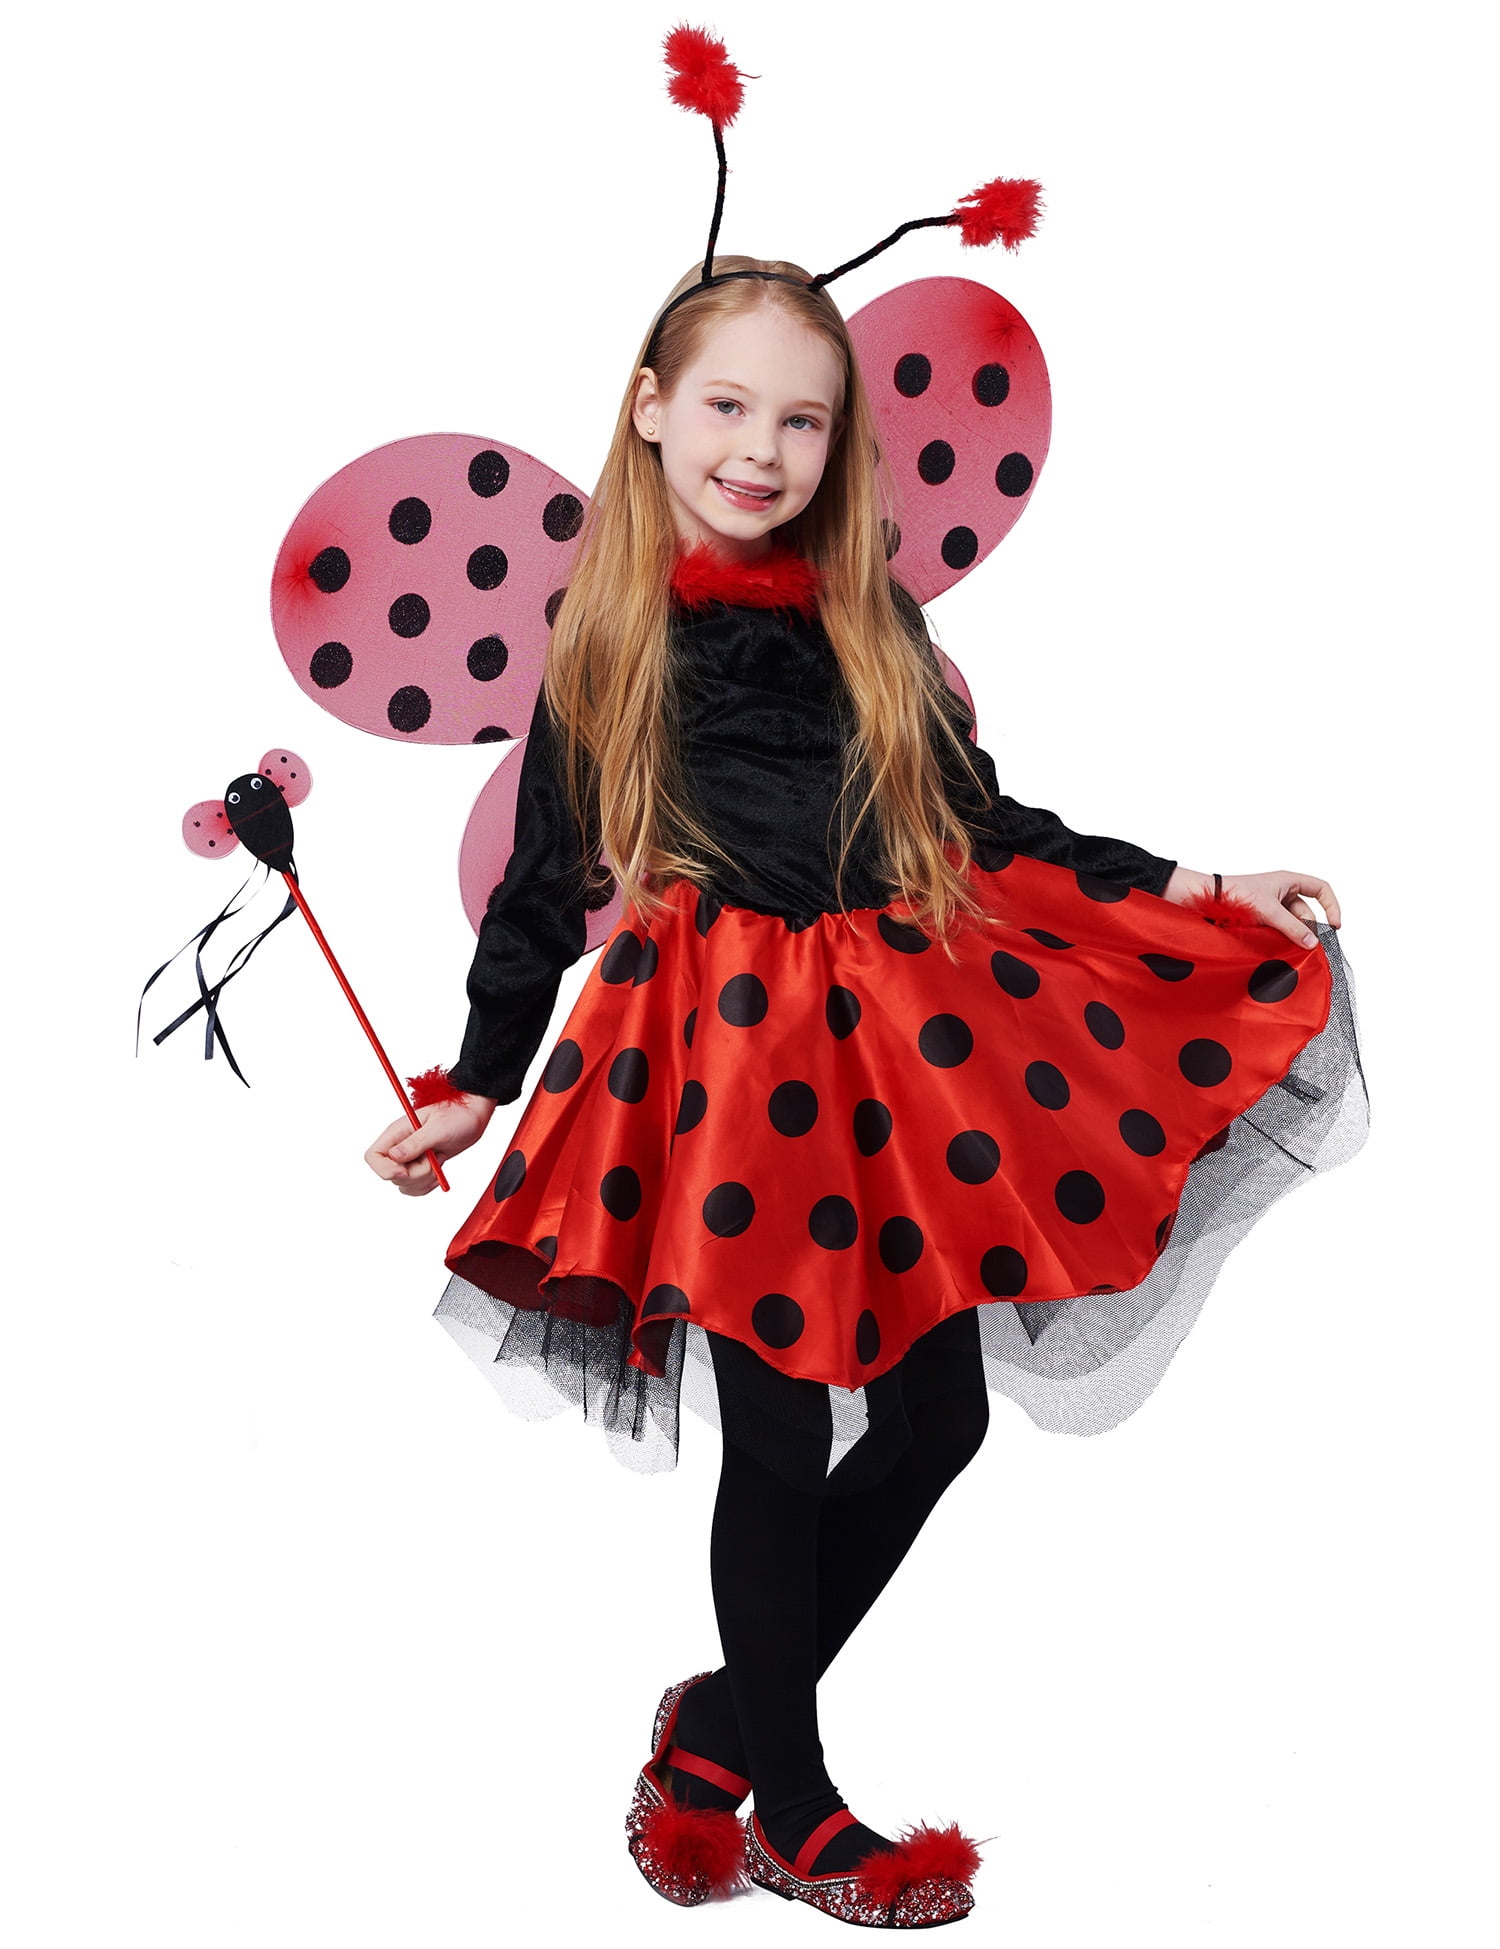 Fancy Dress Up Girls 3-5 Years Fancy Dress for Kids & Toddlers by Pretend to Bee Royal Princess Costumes for Girls Premium Princess Dress Up for Girls Royal Queen Costume w/ Queen Crown